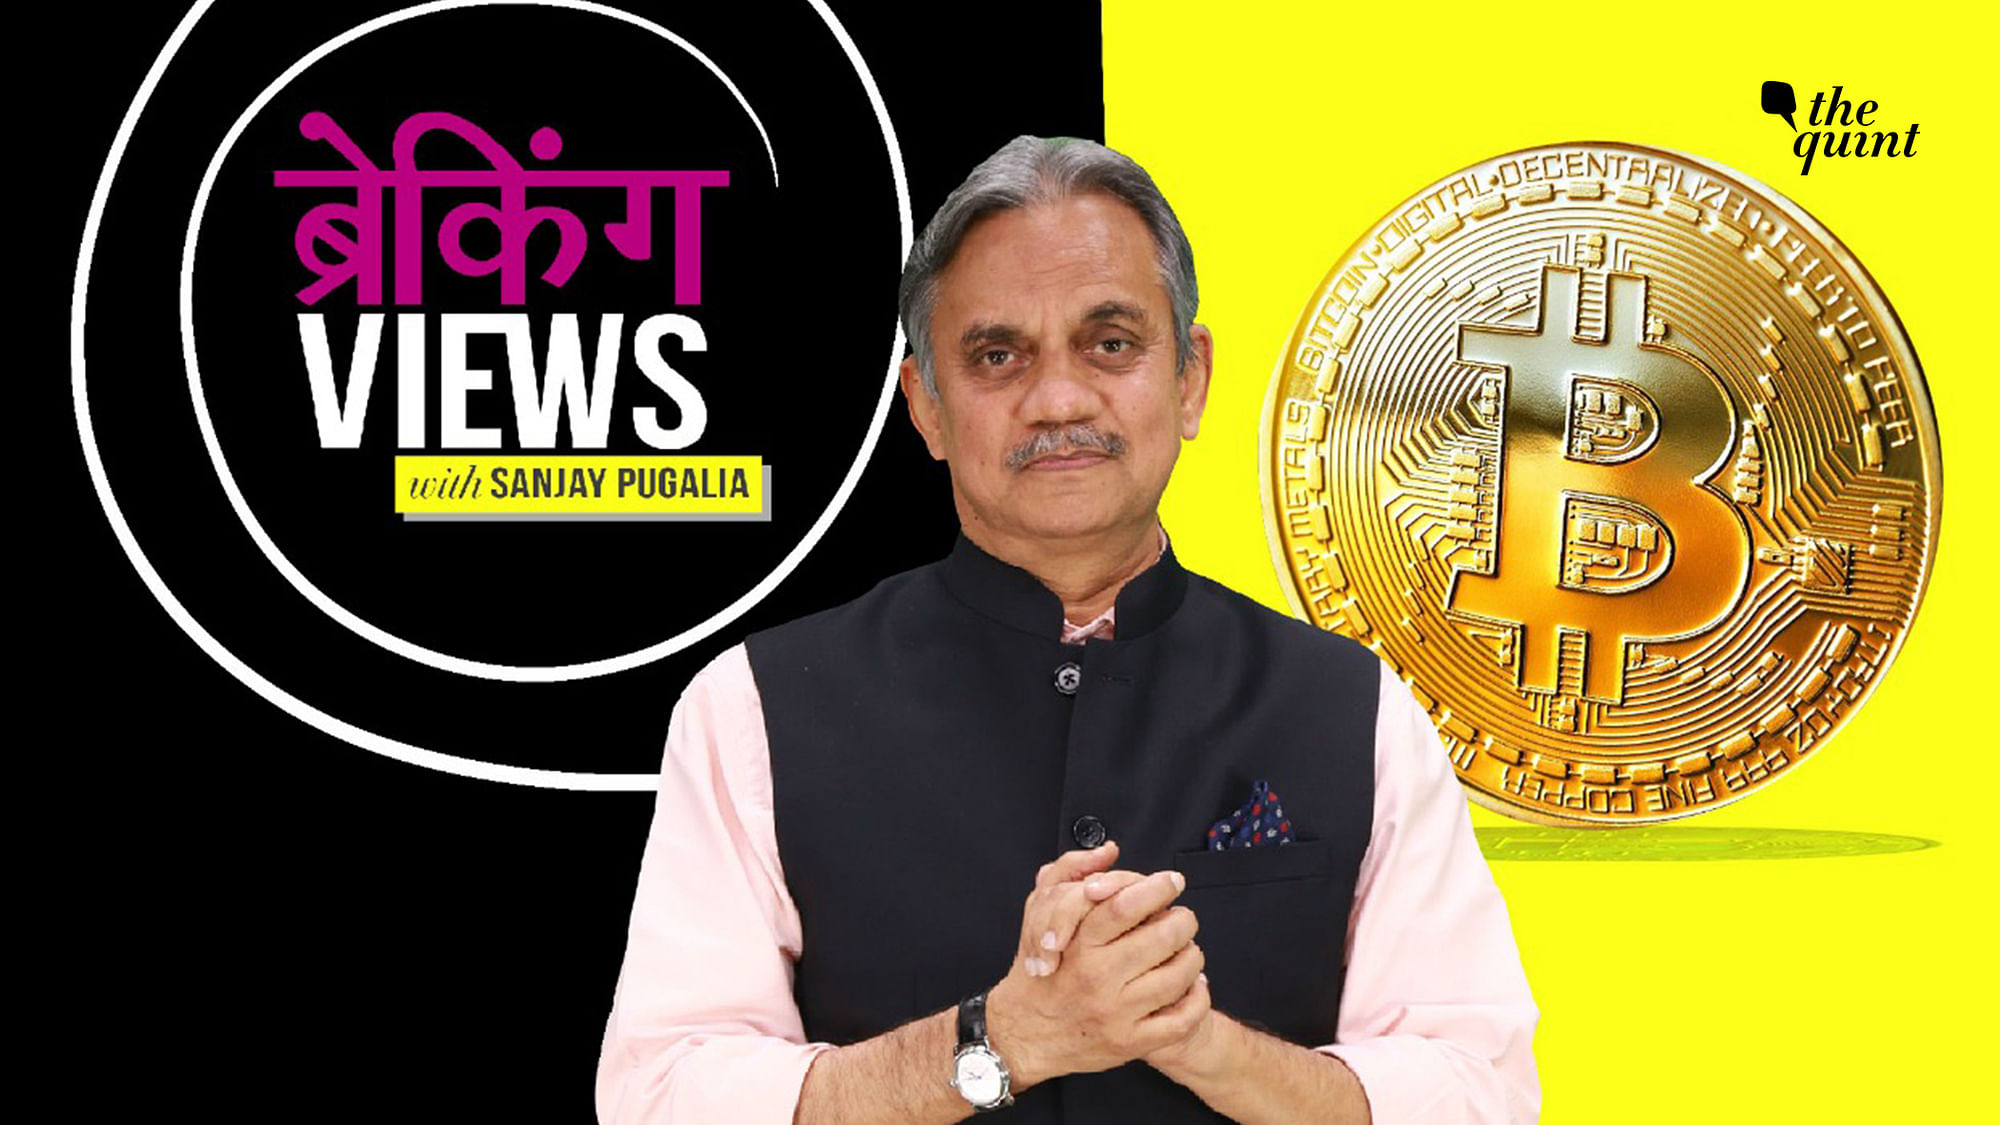 The Quint’s Editorial Director Sanjay Pugalia answers all questions on cryptocurrency.